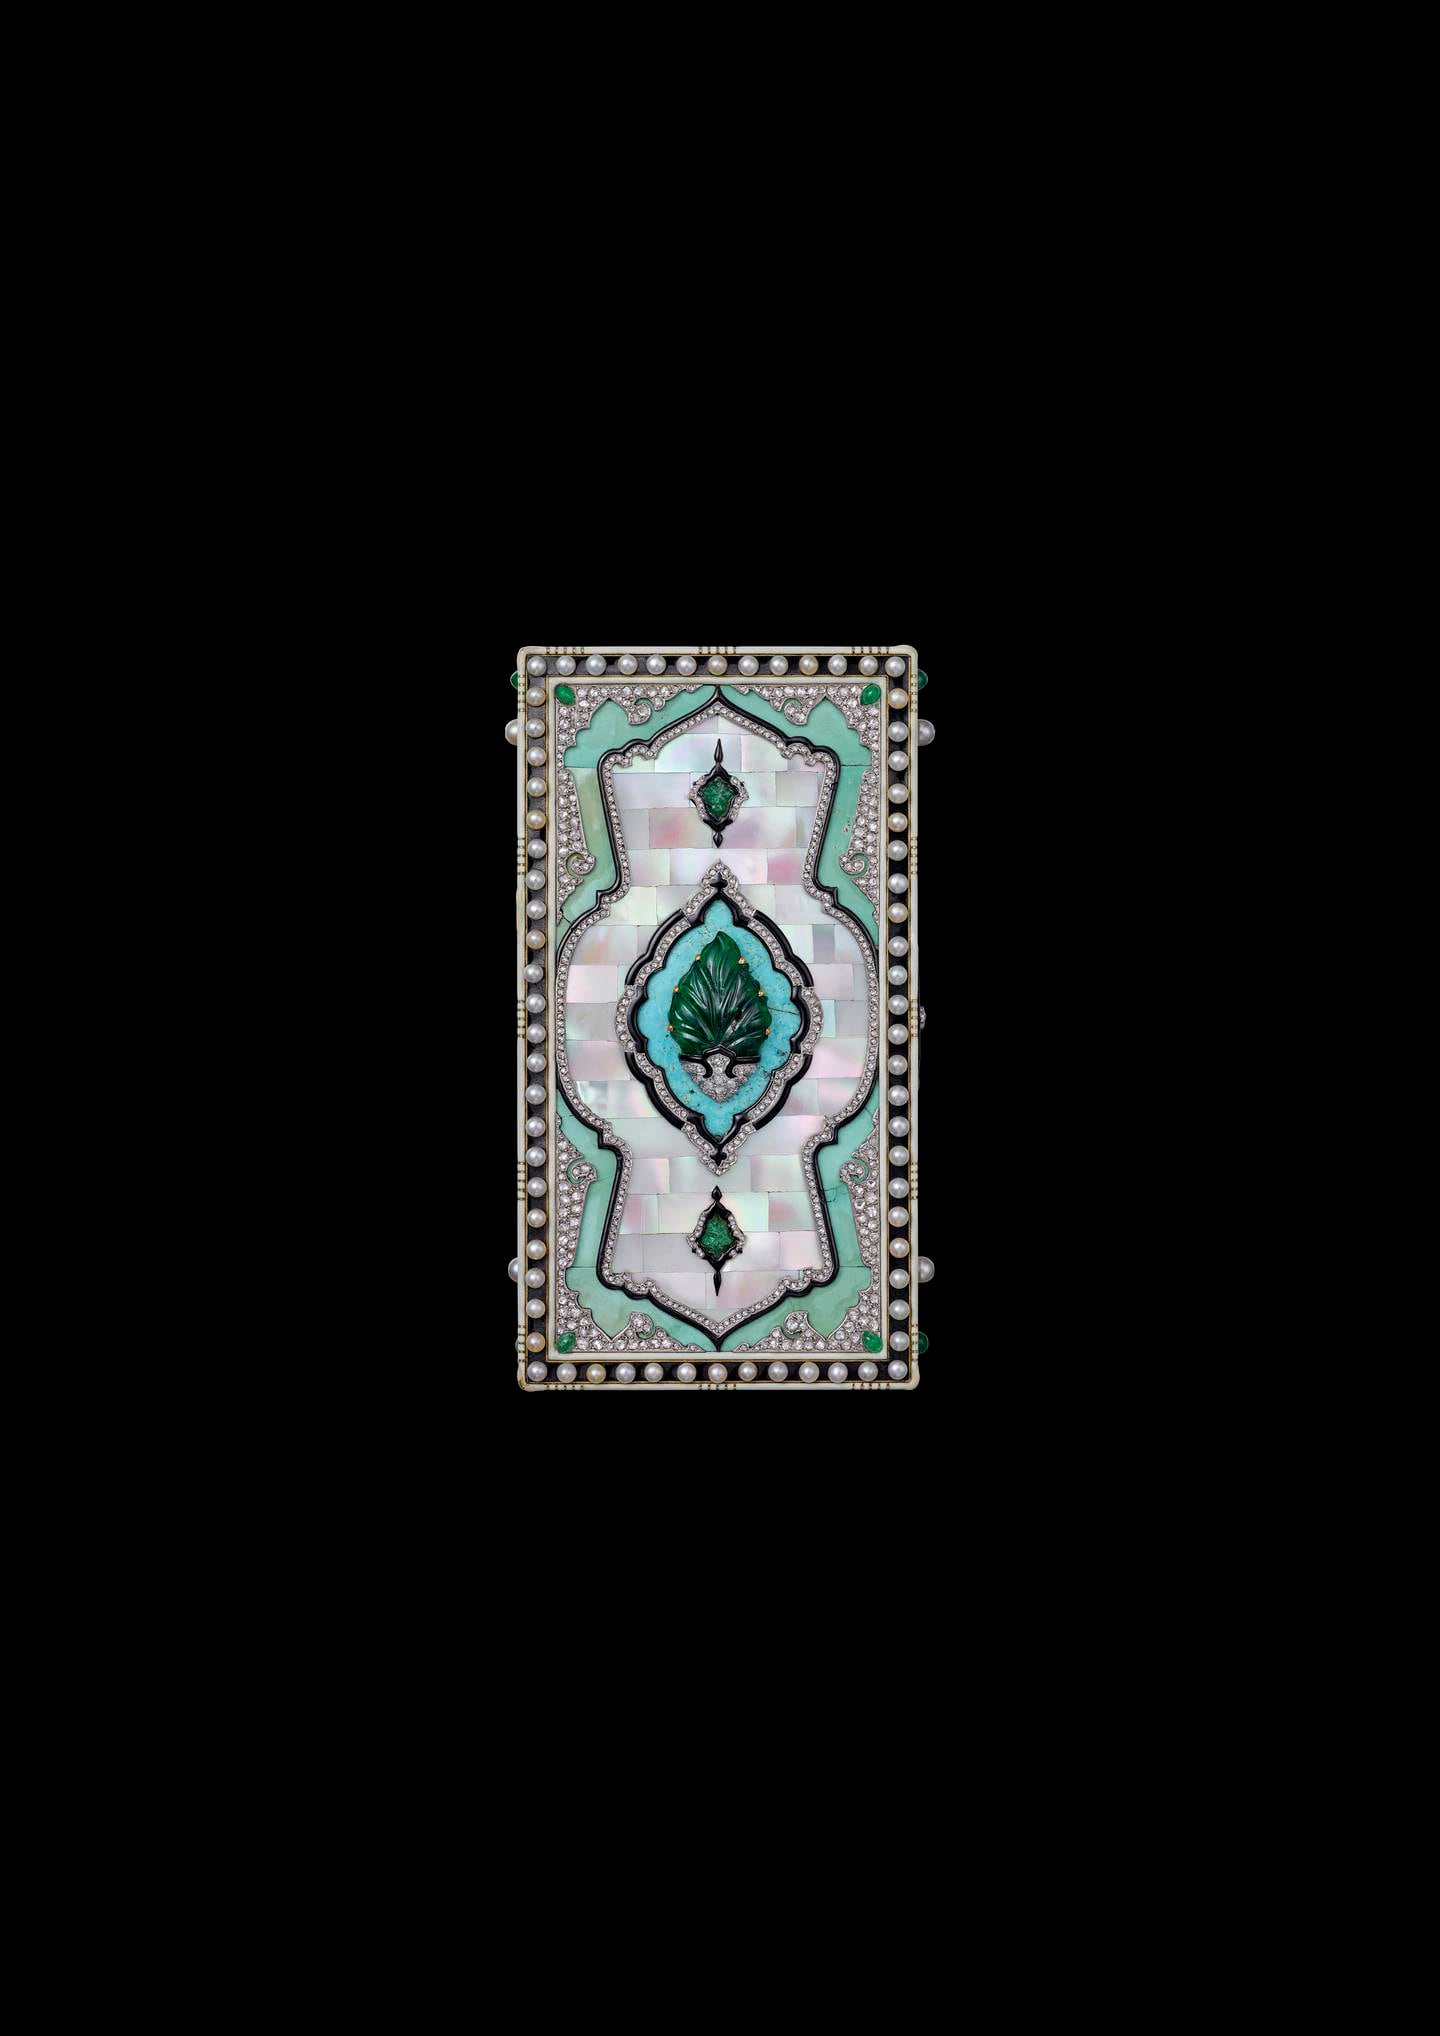 This Cartier vanity case is made with gold, platinum, parquetry of mother-of-pearl and turquoise, emeralds, pearls, diamonds, and black and cream enamel. Photo: Cartier Collection 